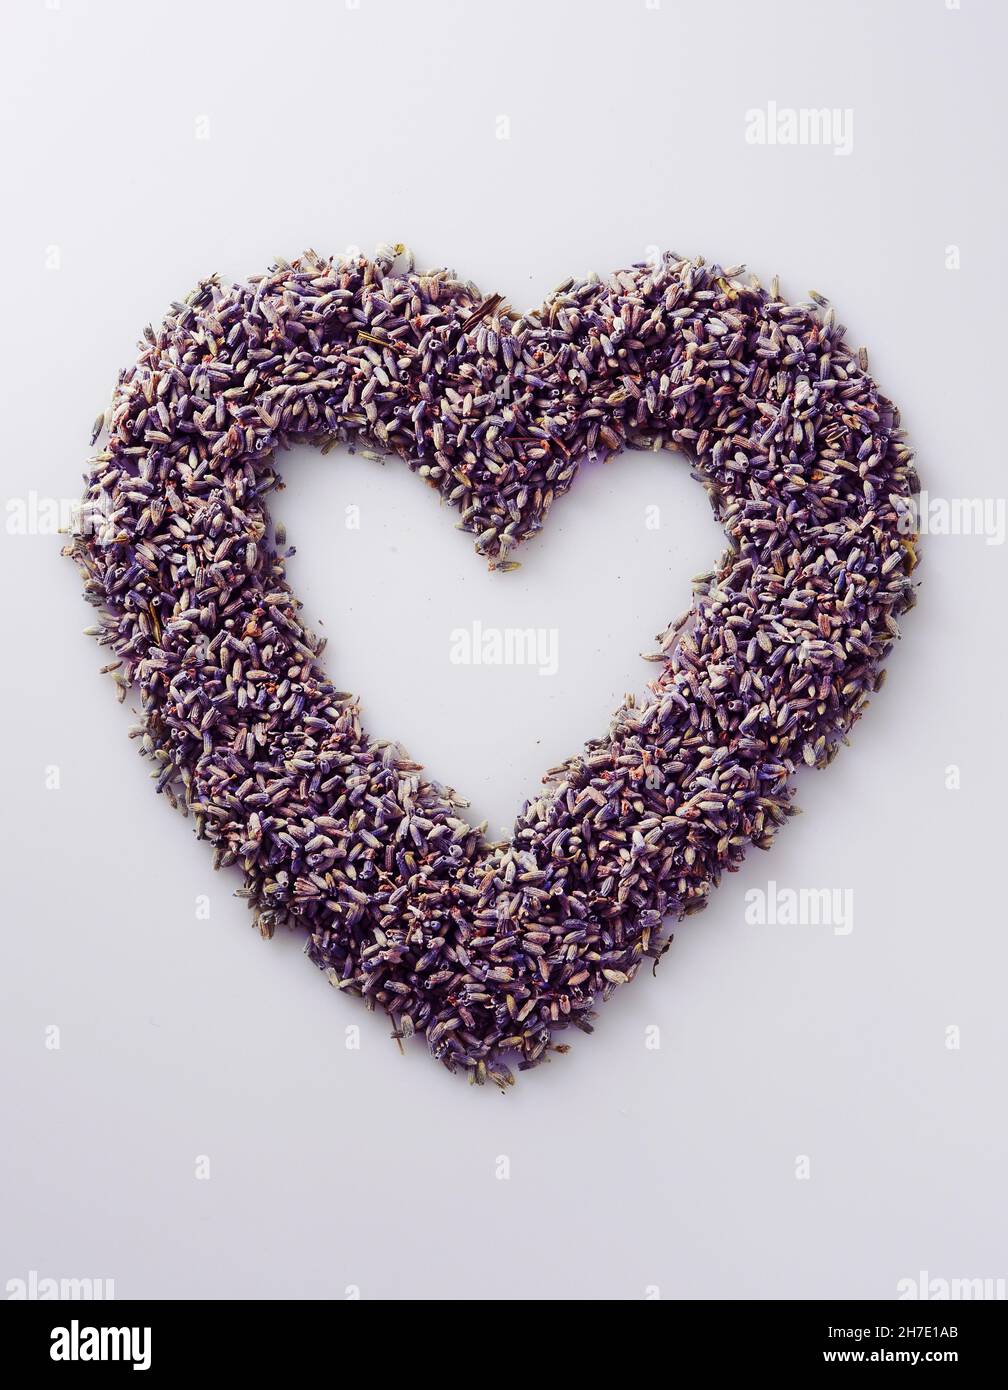 A heart made of lavender flowers Stock Photo